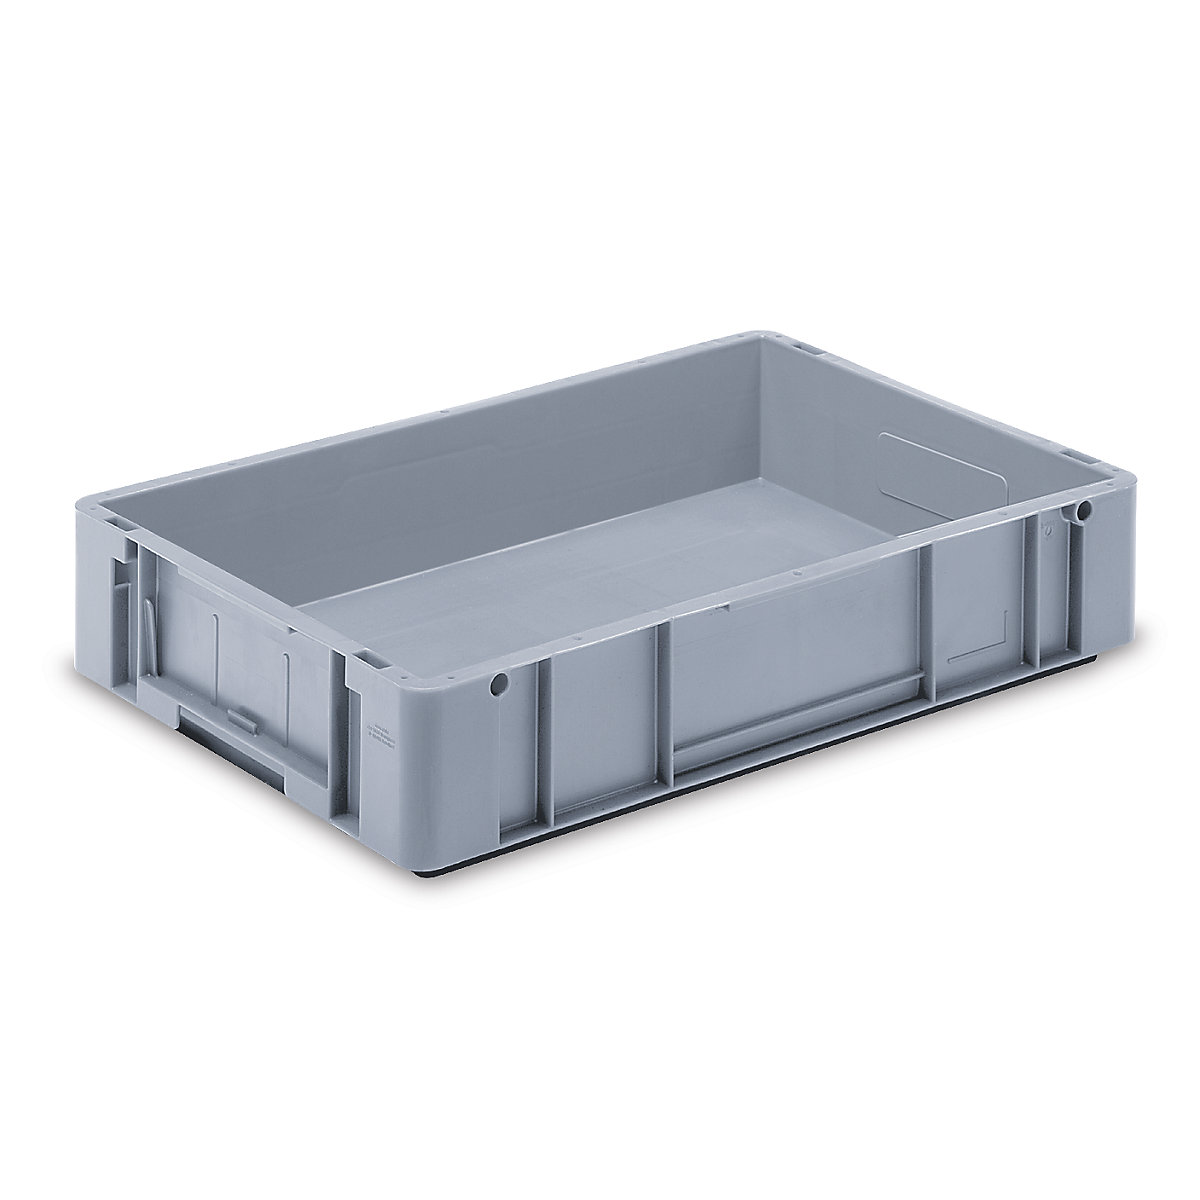 Euro size stacking containers, external LxWxH 600 x 400 x 120 mm, grey, pack of 3